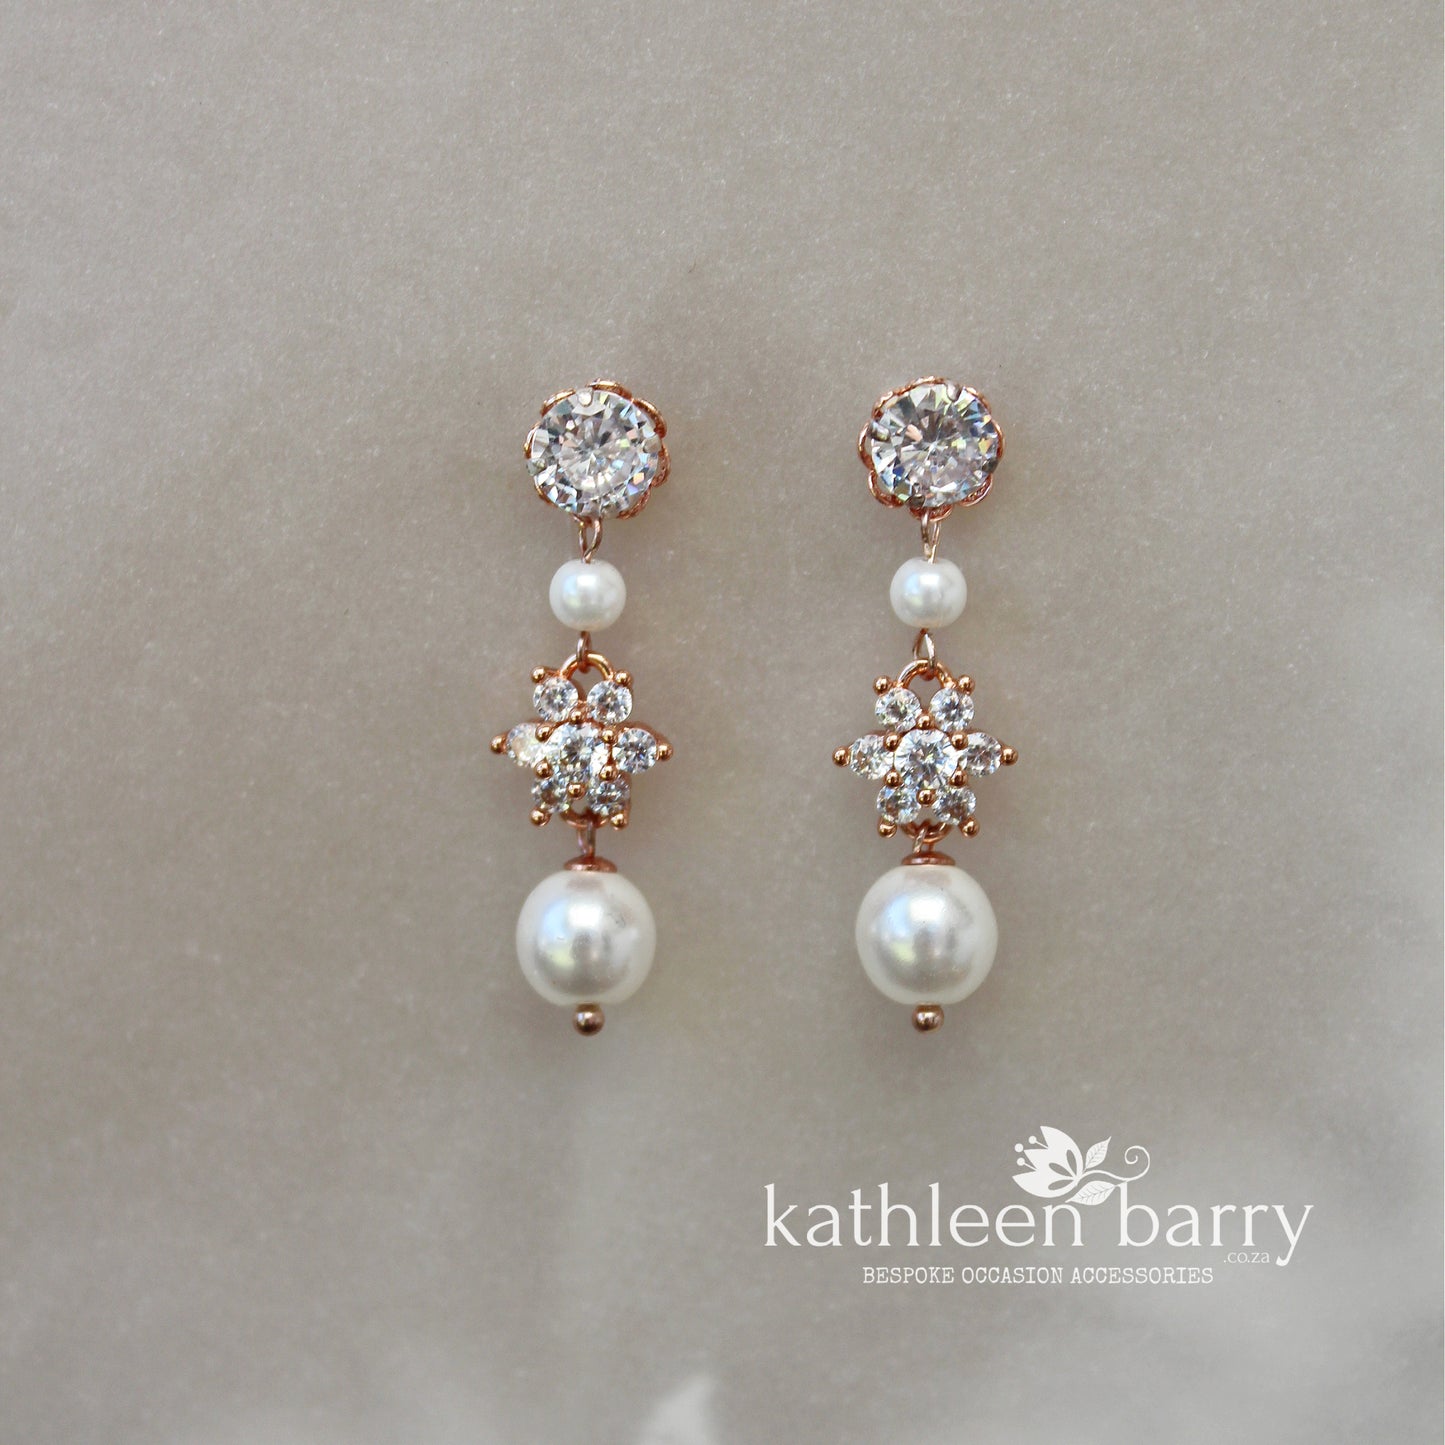 Nina Earrings- Cubic Zirconia & pearl - Available in Silver, gold or rose gold finish - Two way earrings  Limited stock